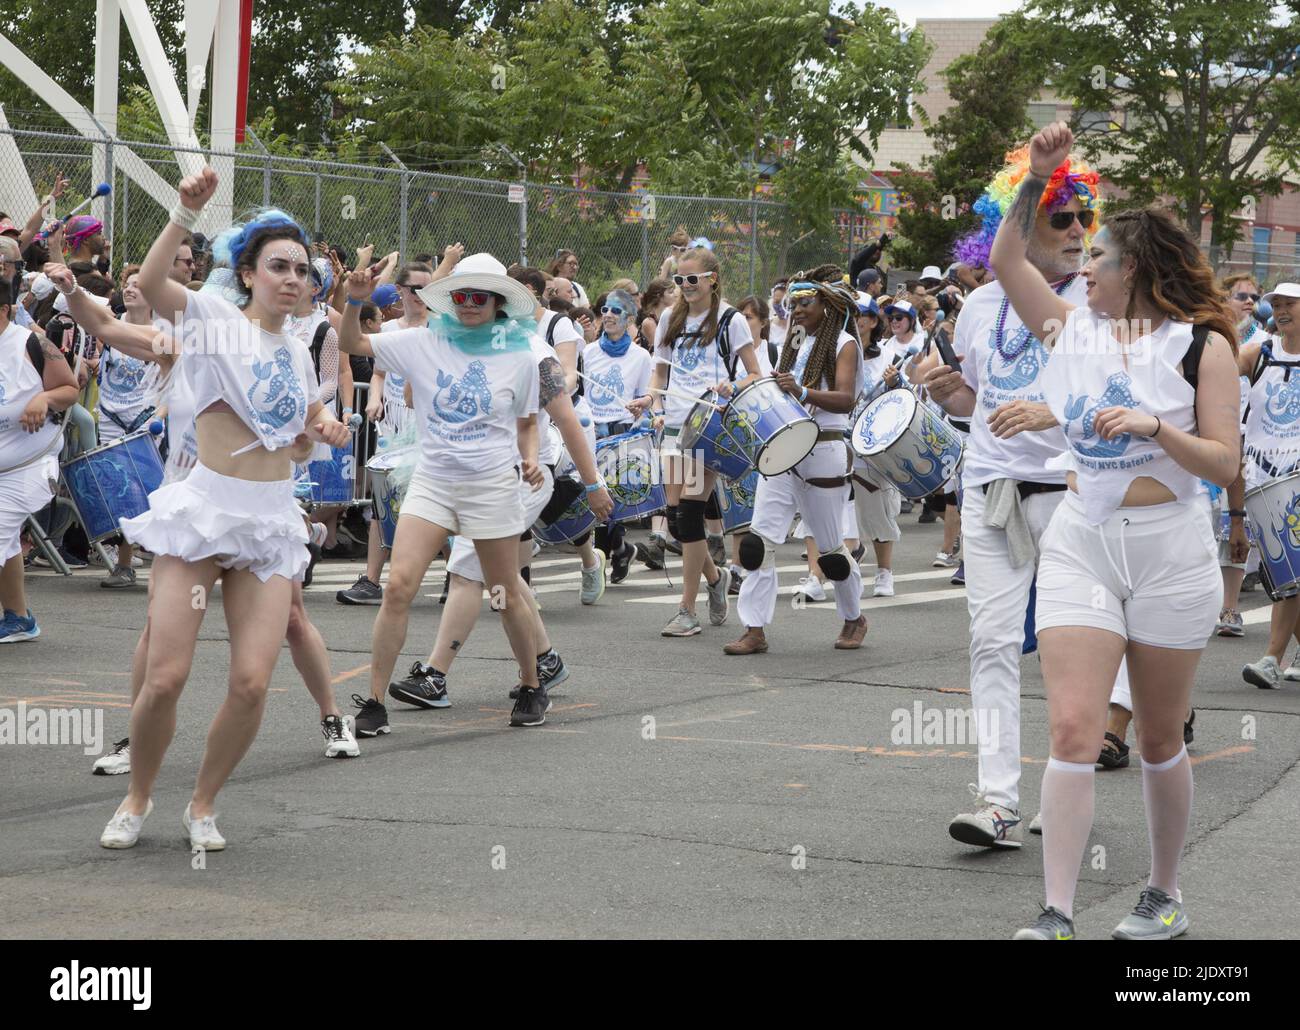 After 2 years from a Covid-19 shutdown, people return to the annual Mermaid Parade, alleged to be the largest art parade in the nation, at Coney Island along Surf Avenue in Brooklyn, New York. Fogo Azul march in full force at the parade. Stock Photo